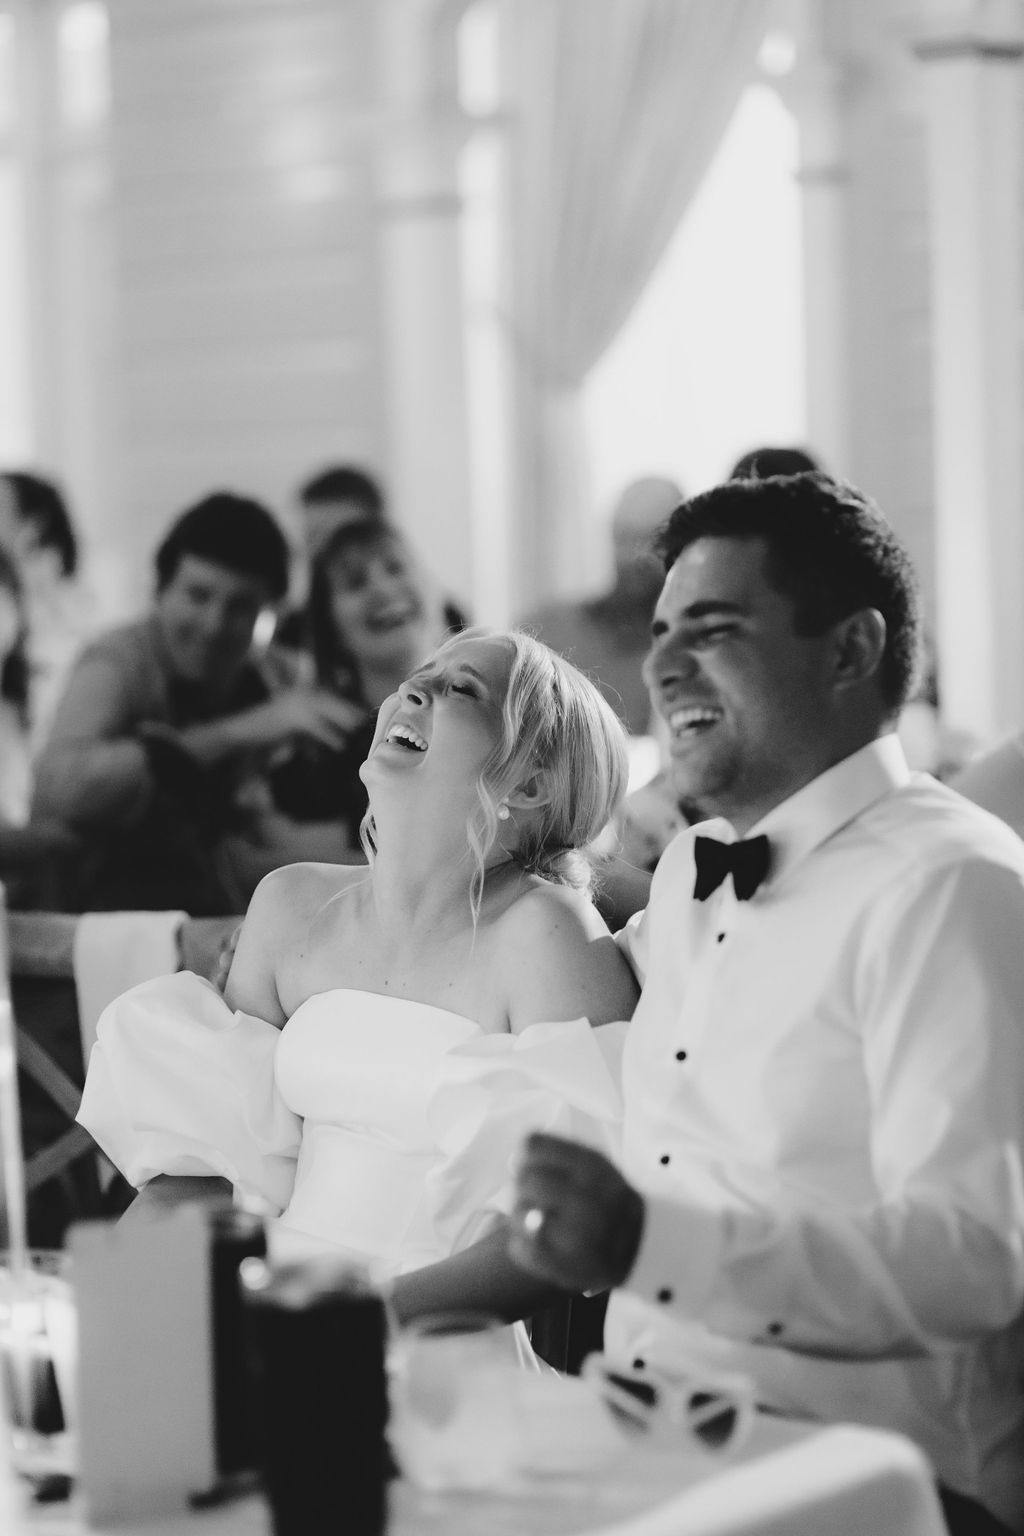 A joyful bride and groom, both dressed in formal attire, sit at a reception table, laughing heartily. The bride is in an off-shoulder white dress and the groom in a white shirt with a black bow tie. Guests in the background also appear to be smiling and enjoying the moment.